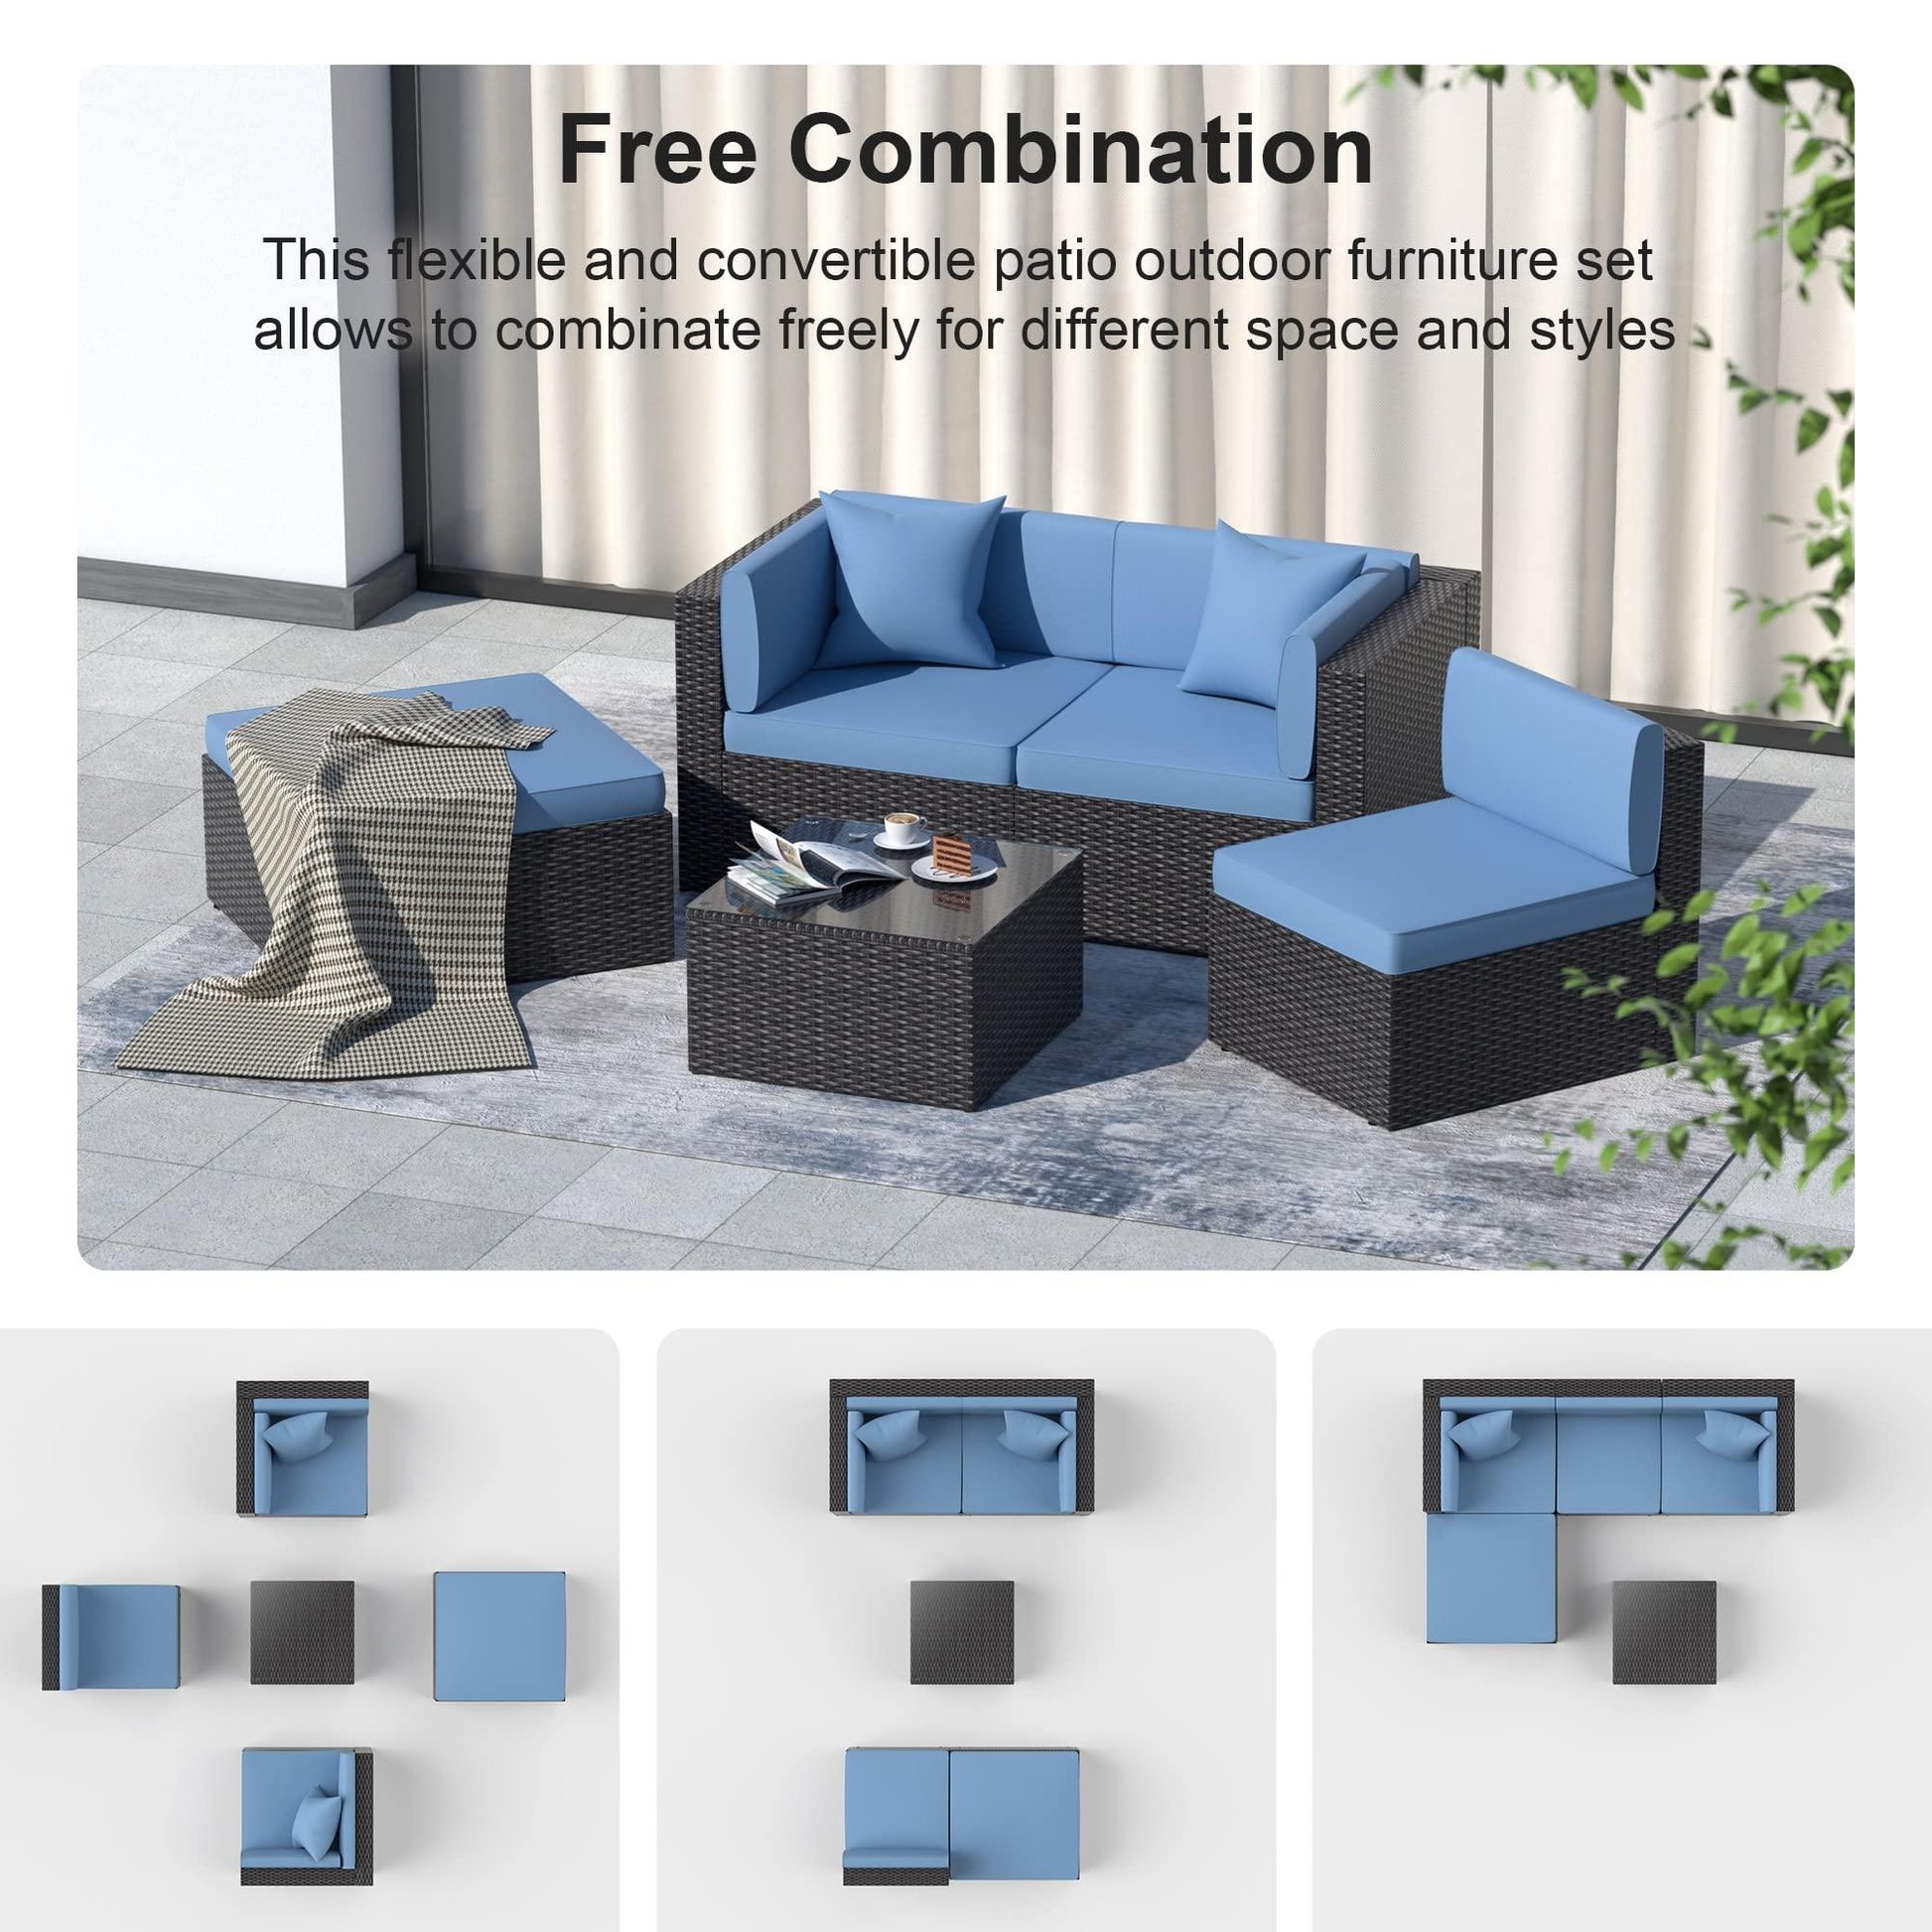 GOJOOASIS Outdoor Patio Furniture Sets Sectional Wicker Couch Conversation Sofa Seating - CookCave